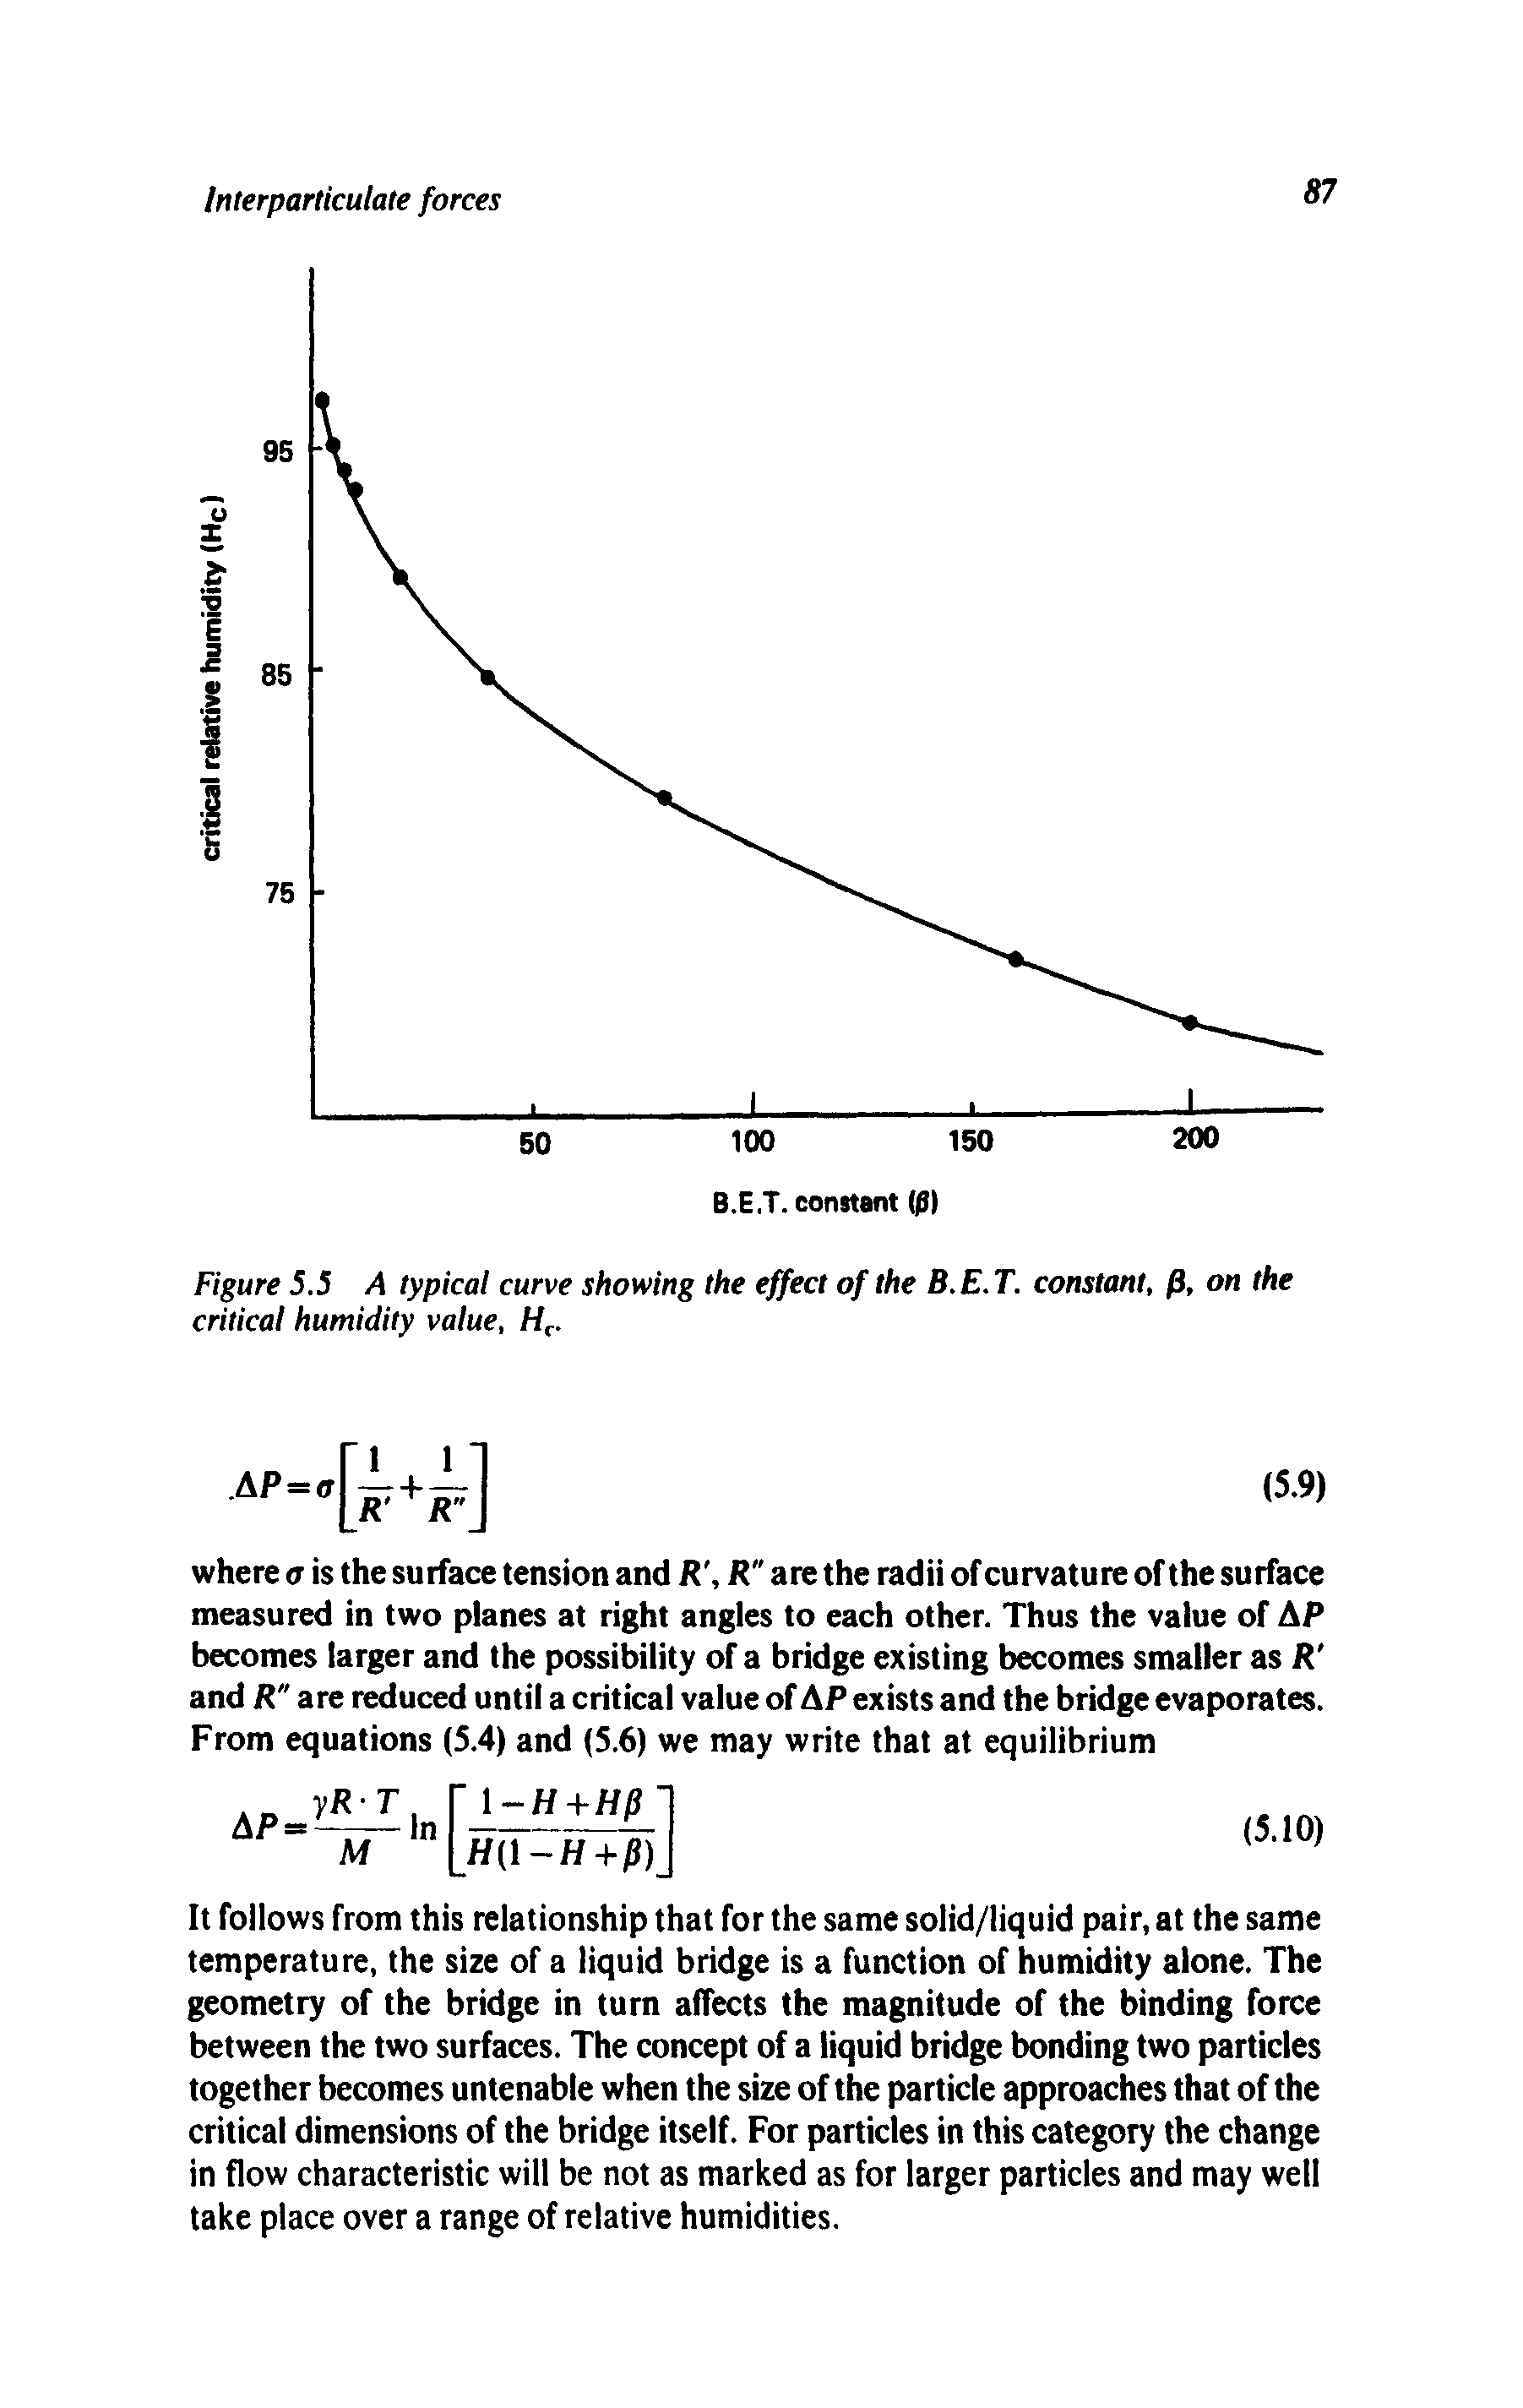 Figure 5.5 A typical curve showing the effect of the B.E.T. constant, p, on the critical humidity value, H. ...